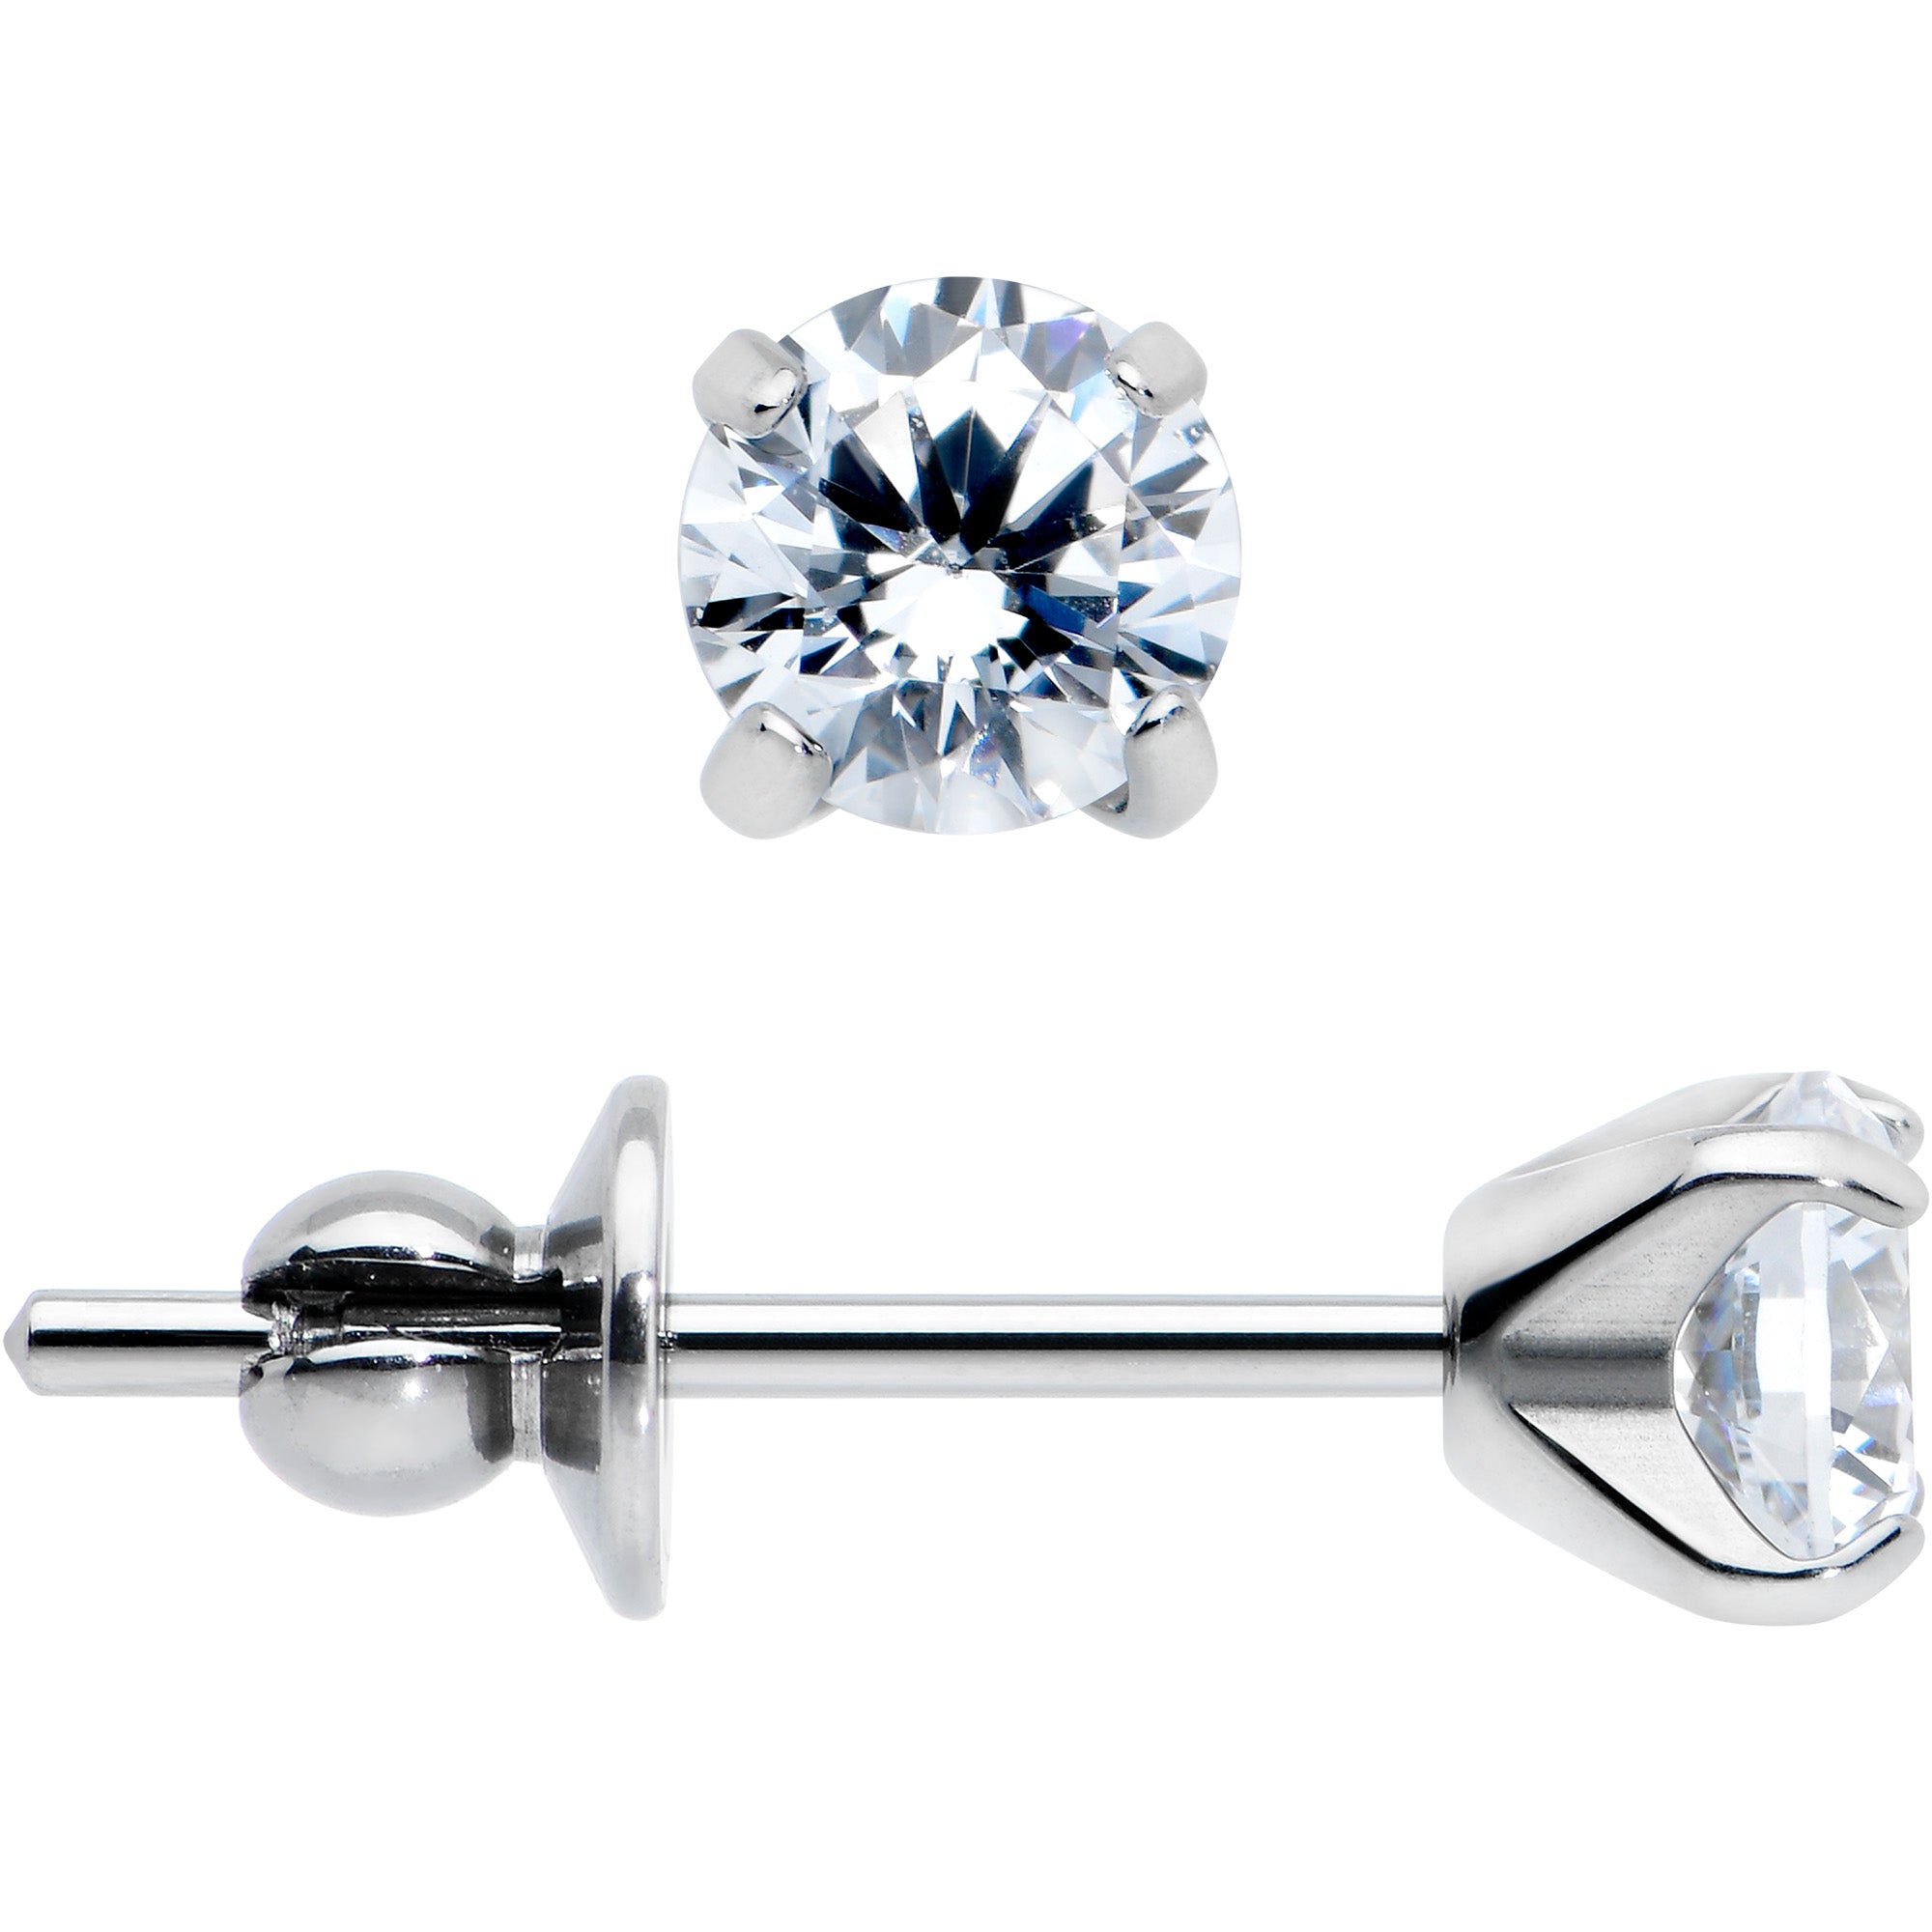 Sterling Silver Quality Small Clear CZ Stud Earrings Vintage